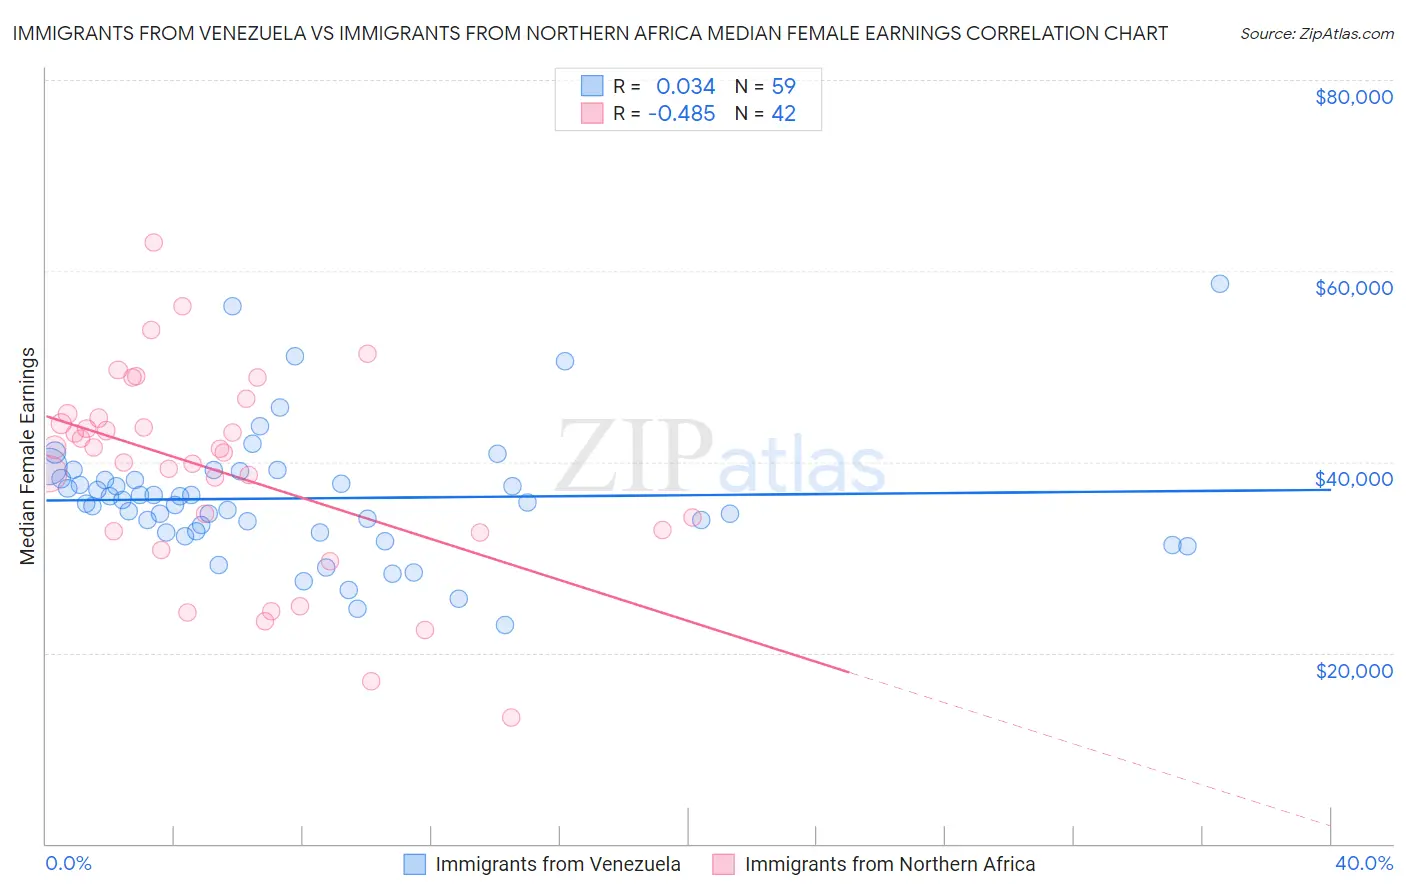 Immigrants from Venezuela vs Immigrants from Northern Africa Median Female Earnings